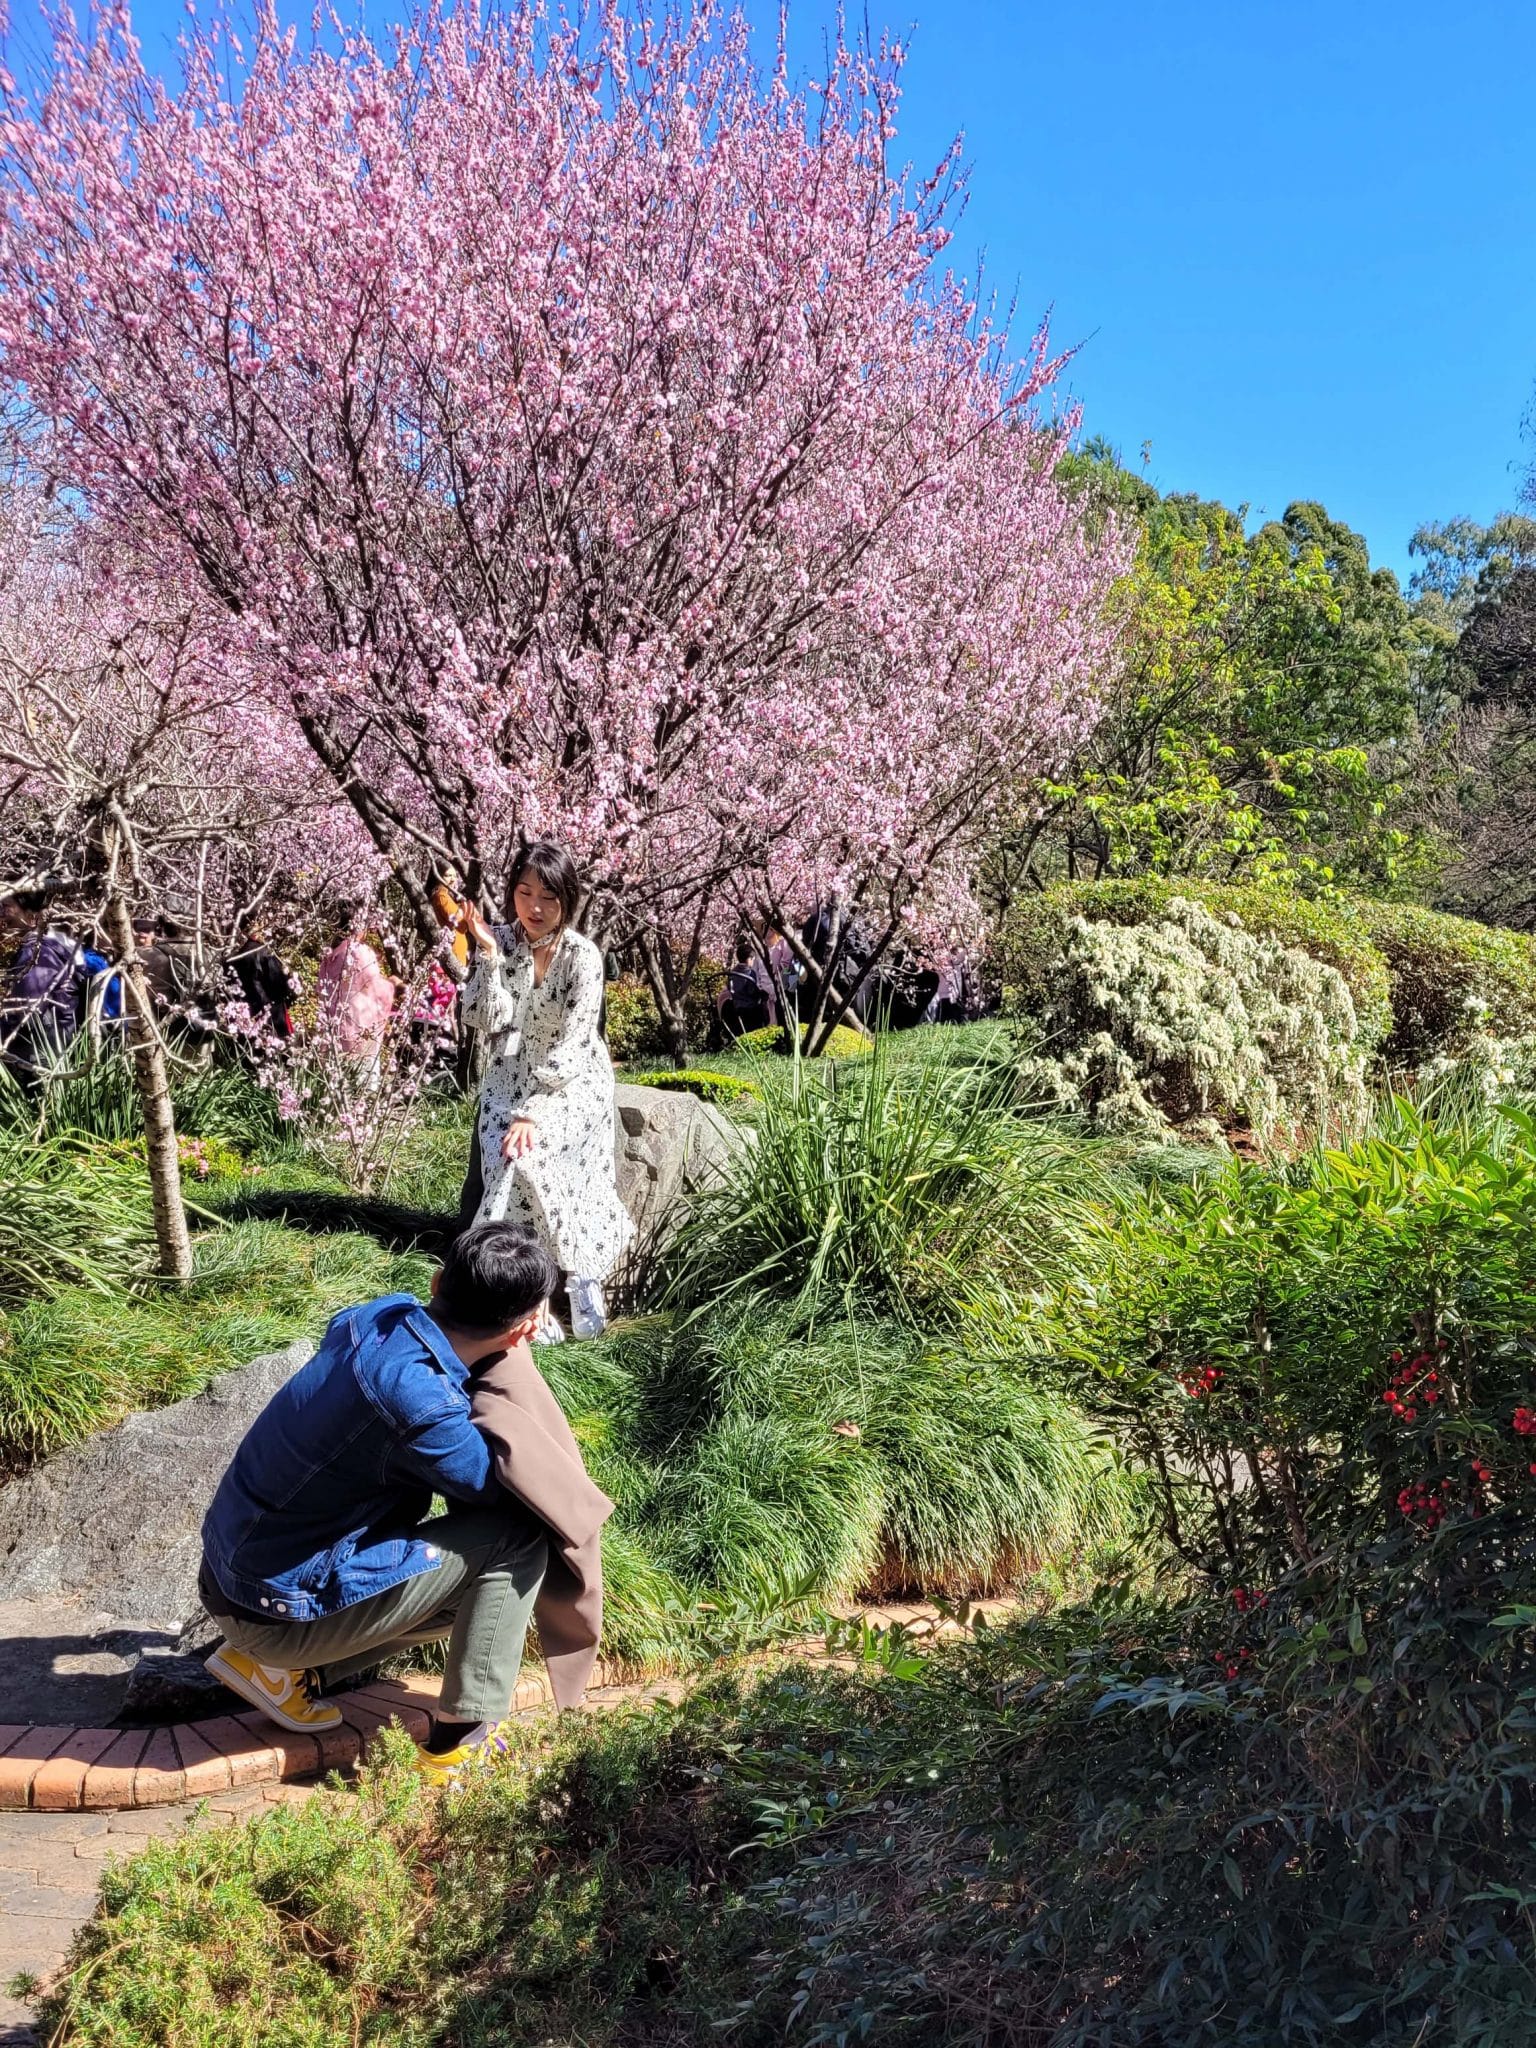 It's all about the photo at the cherry blossom festival